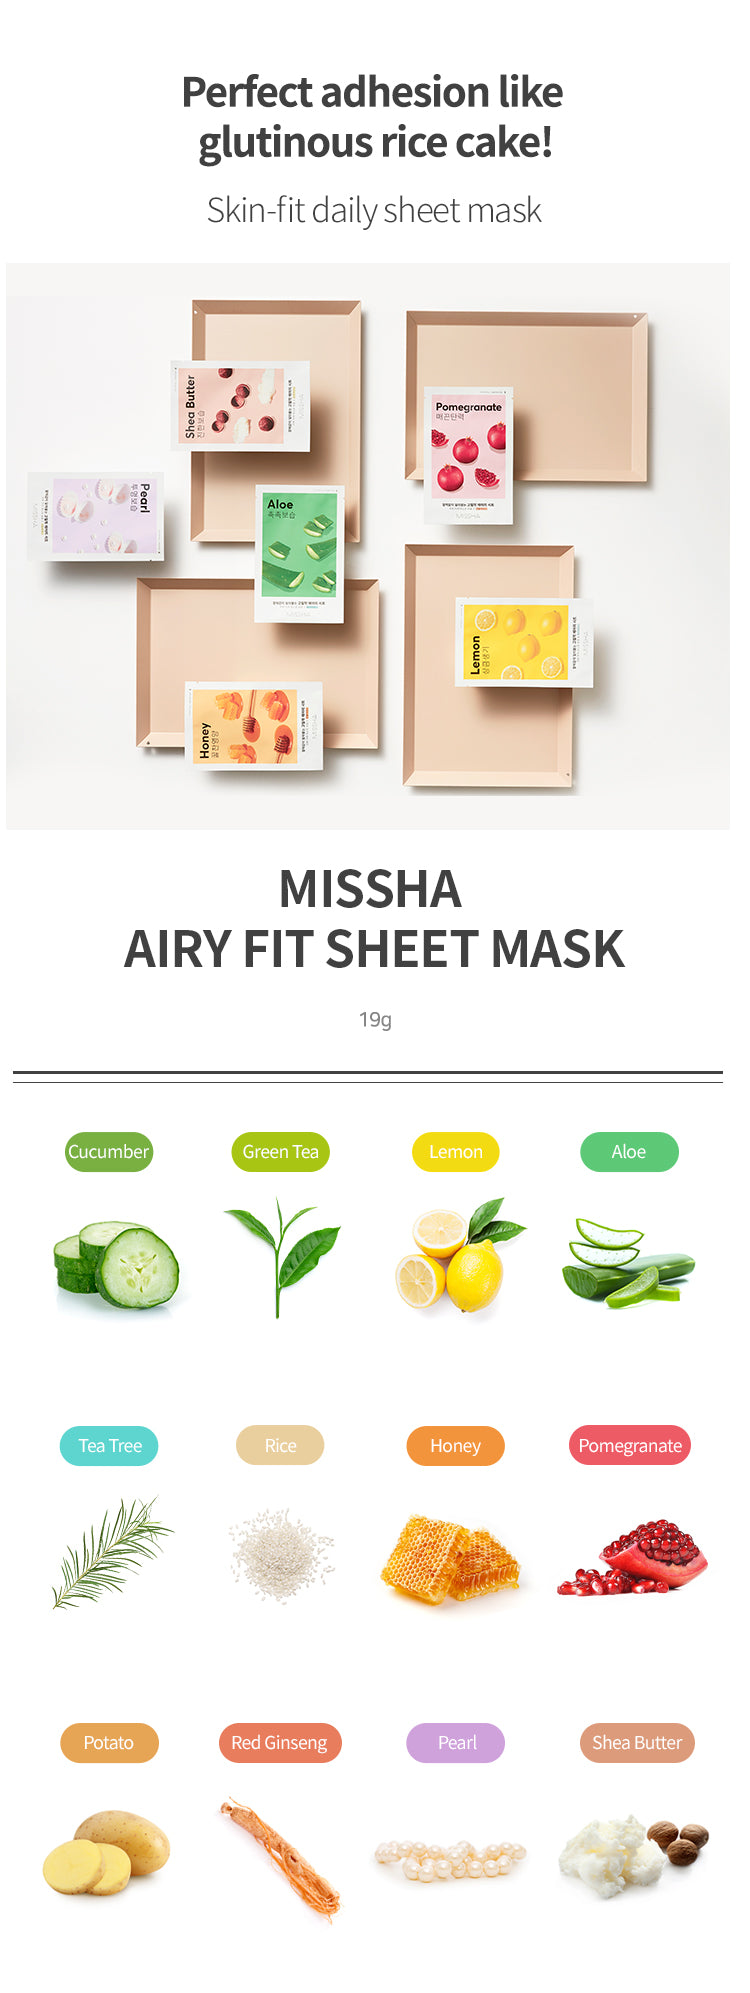 Airy Fit Sheet Mask Info 1